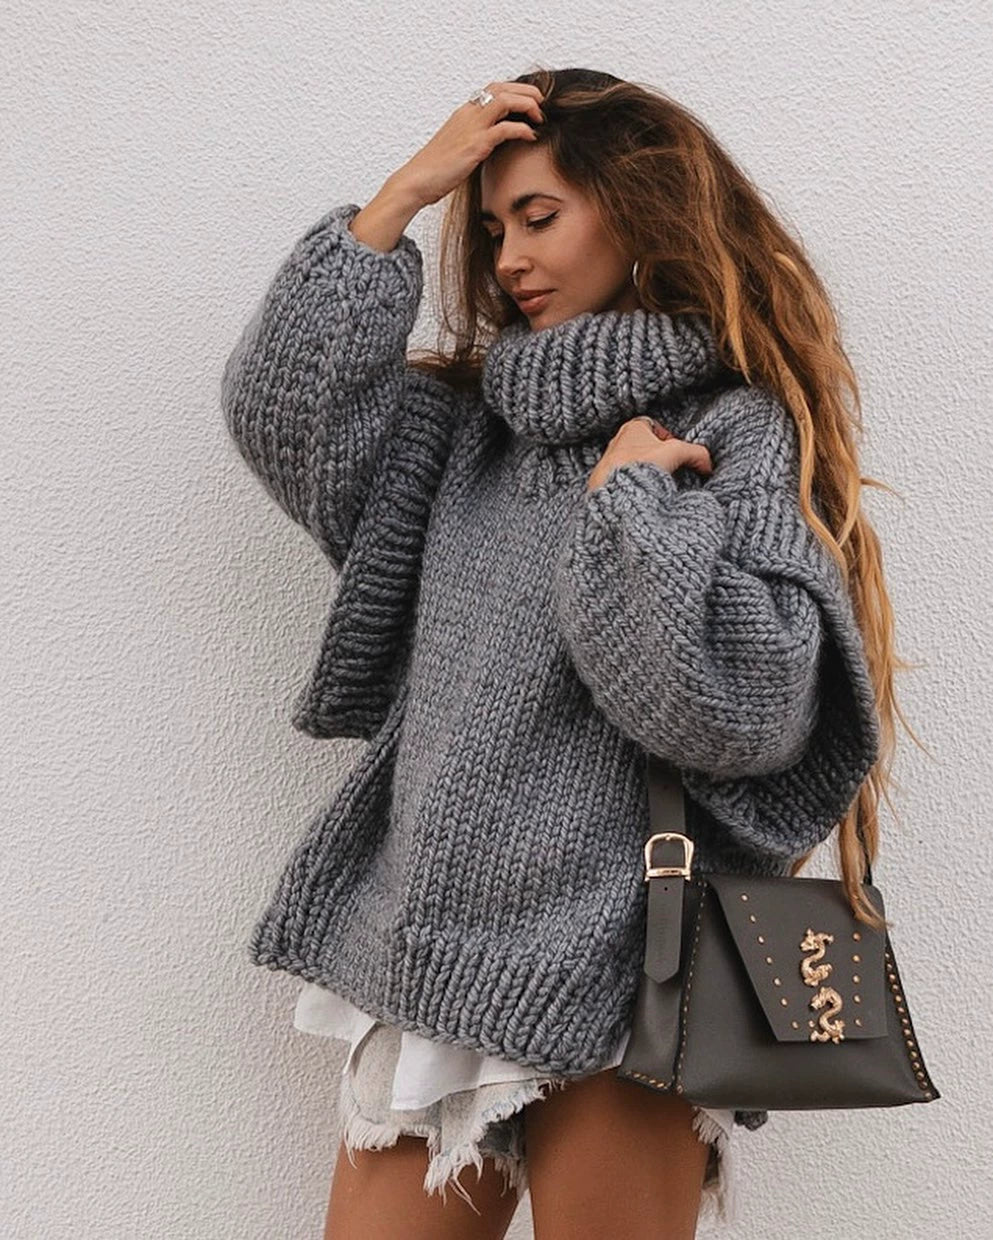 LaPose Fashion - Carolla Knitted Oversize Sweater - Clean Girl, Cozy Girl, Knitted Clothes, Knitted Tops, Long Sleeve Tops, Loose Sweaters, Oversize Swe